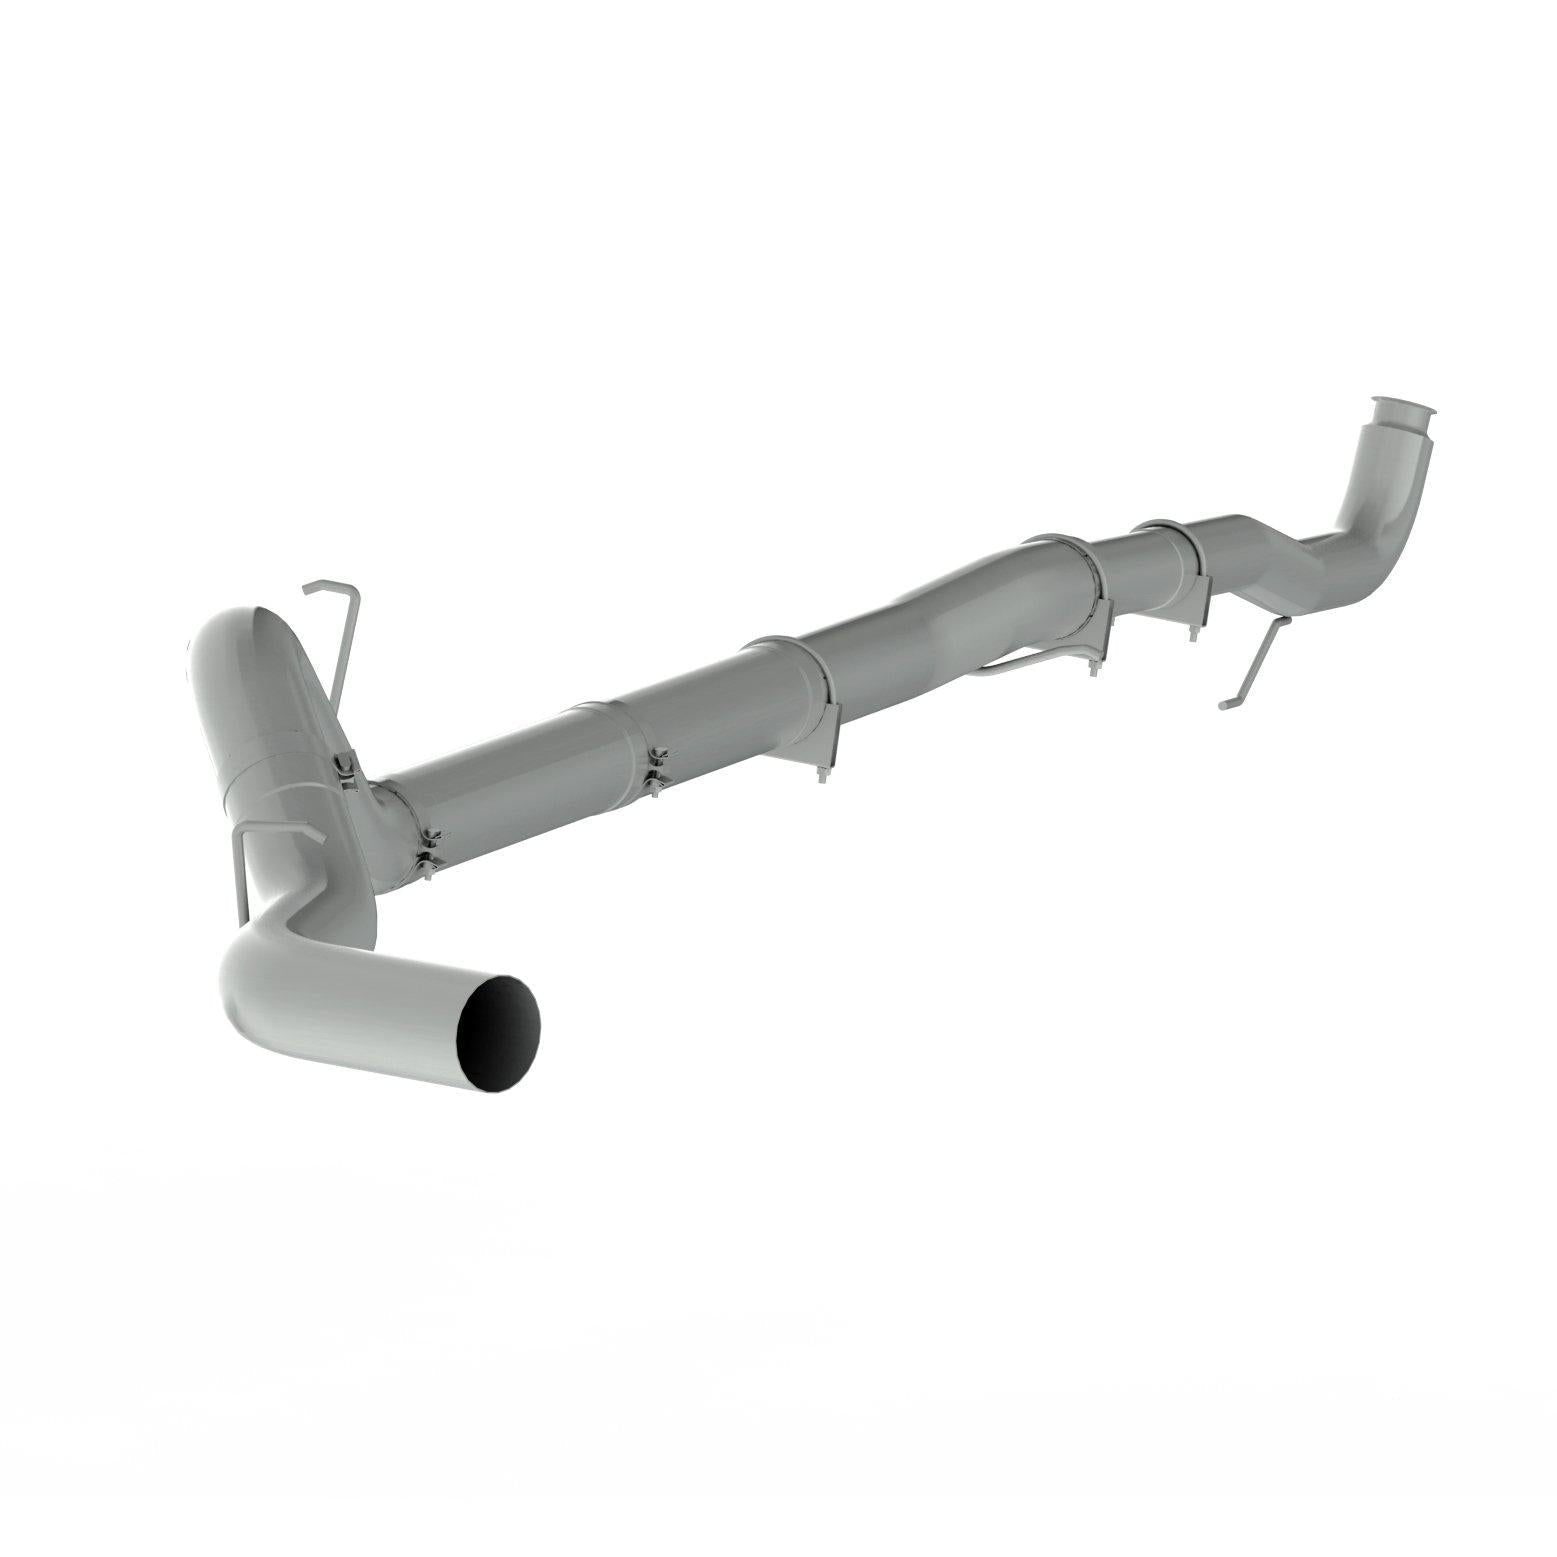 2011-2015 Duramax SS 5" Downpipe Back Exhaust - No Muffler (C6048SLM)-Downpipe Back Exhaust System-P1 Performance Products-C6048SLM-Dirty Diesel Customs